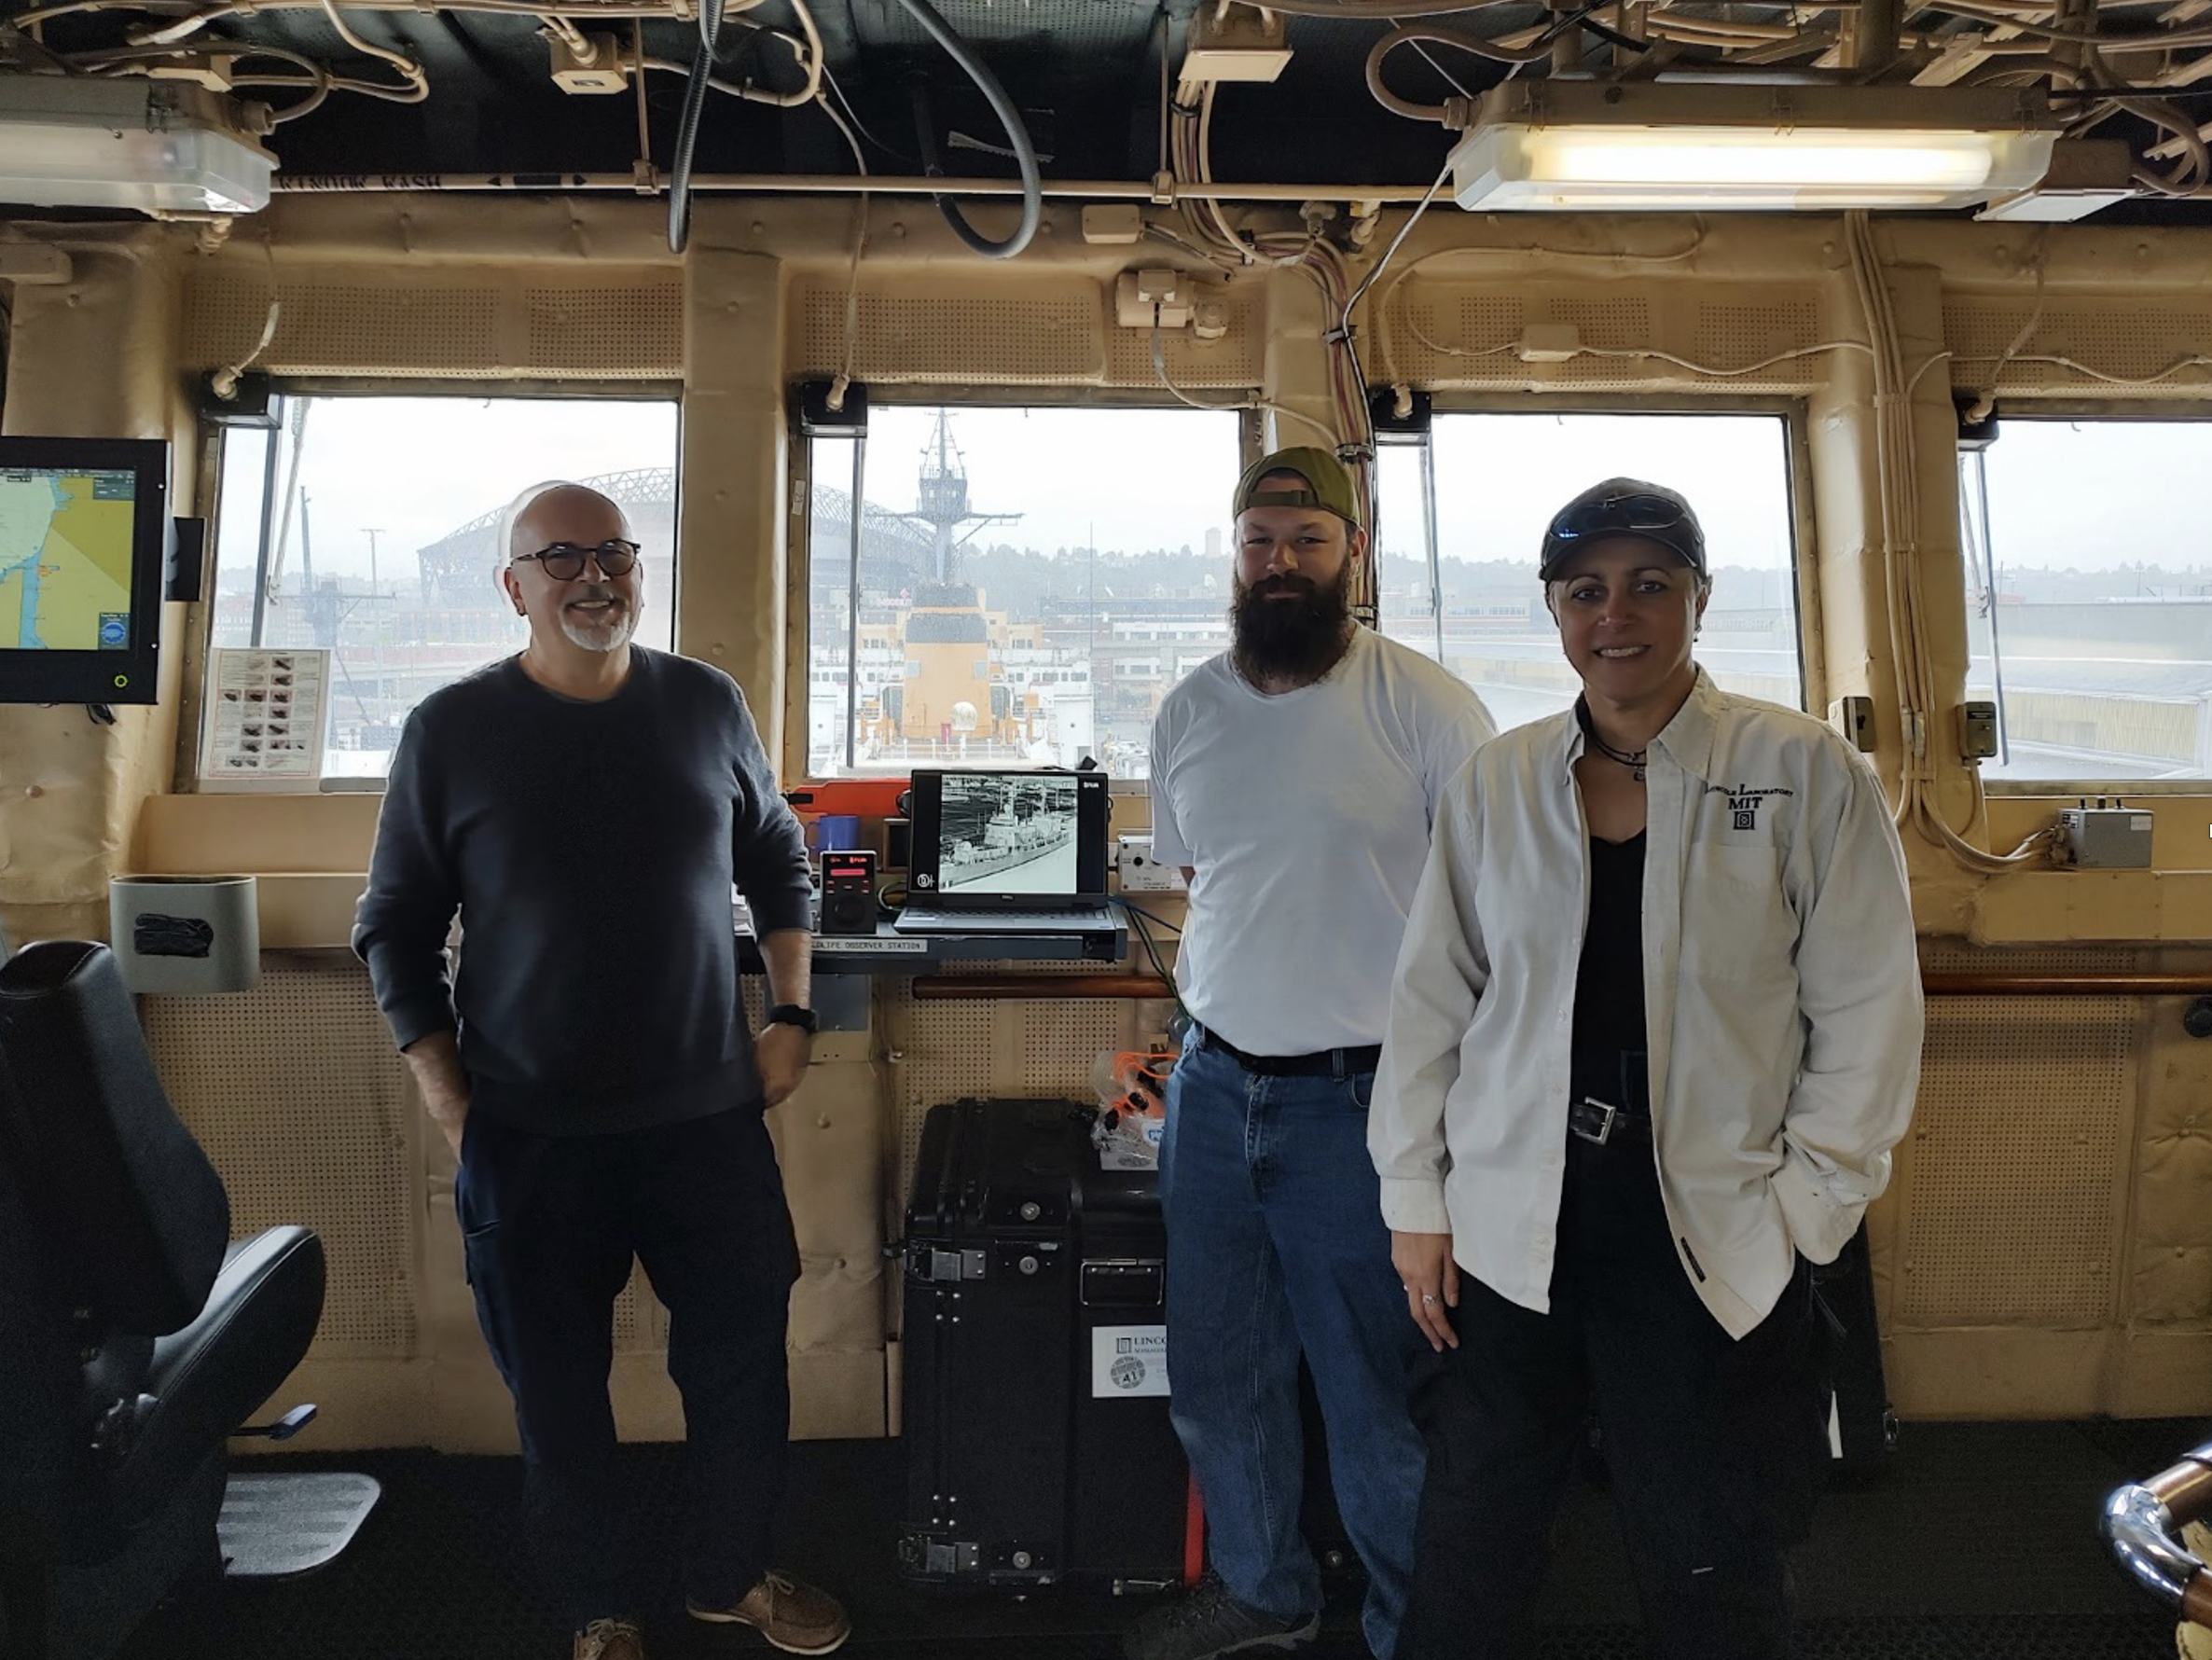 A group of three researchers standing inside the bridge of the healy boat. a computer screen is visible behind them showing imagery from their system.